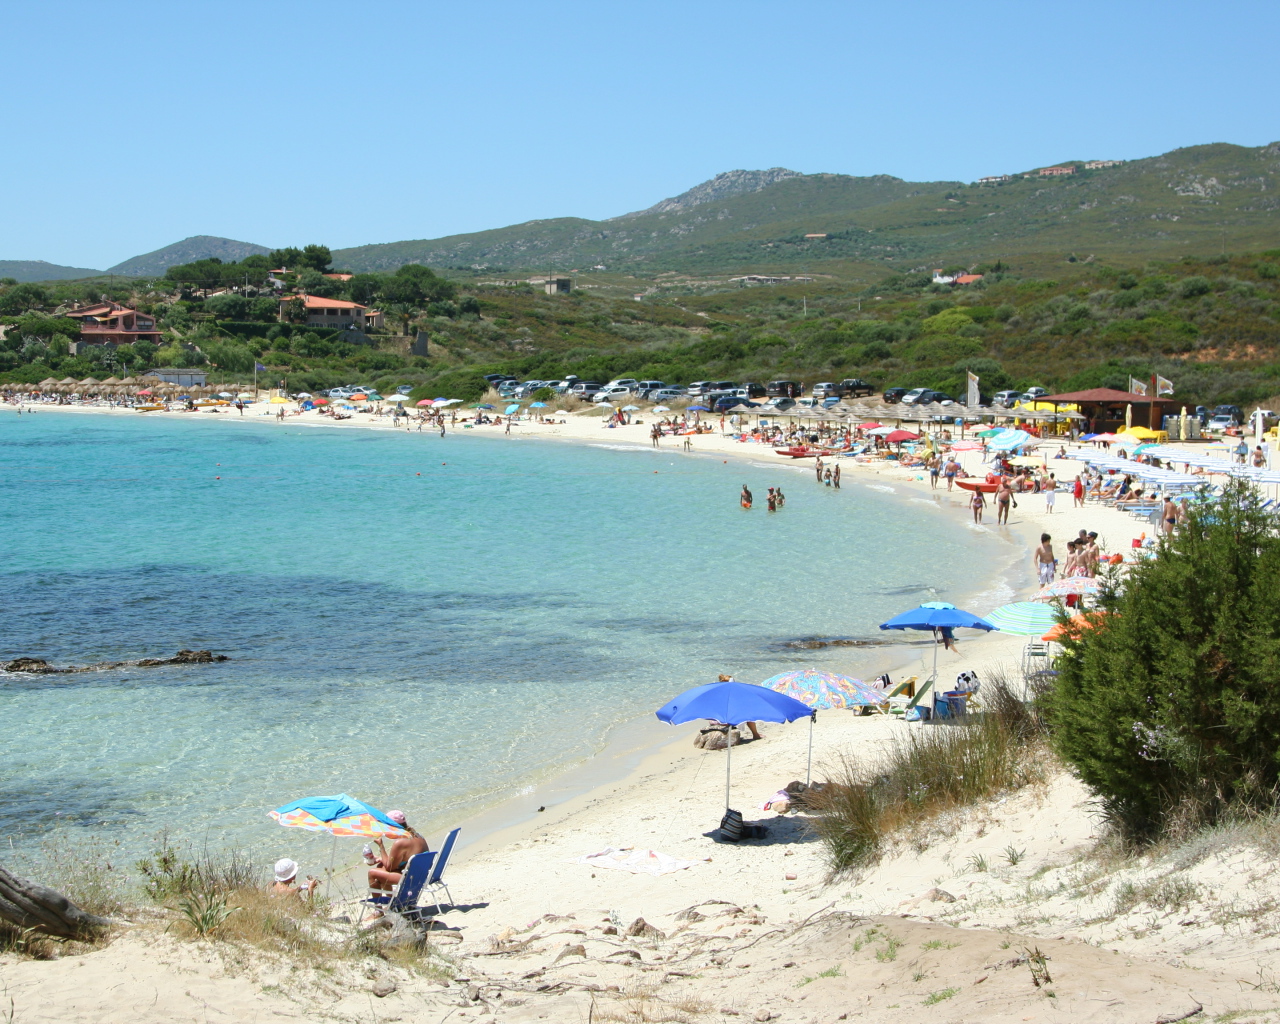 Summer vacation at the beach on the Costa Smeralda, Italy